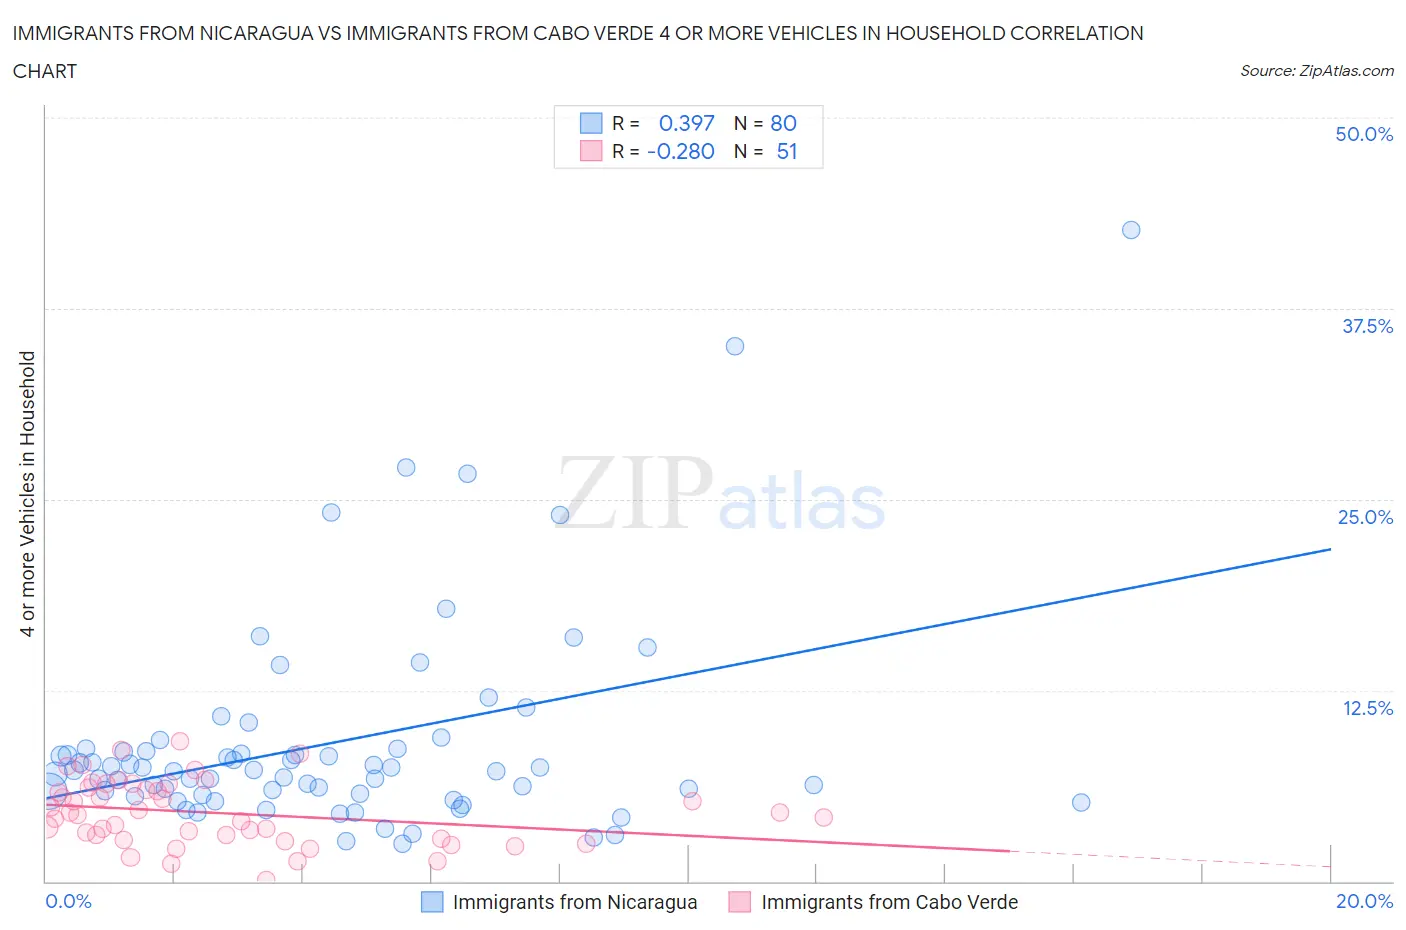 Immigrants from Nicaragua vs Immigrants from Cabo Verde 4 or more Vehicles in Household